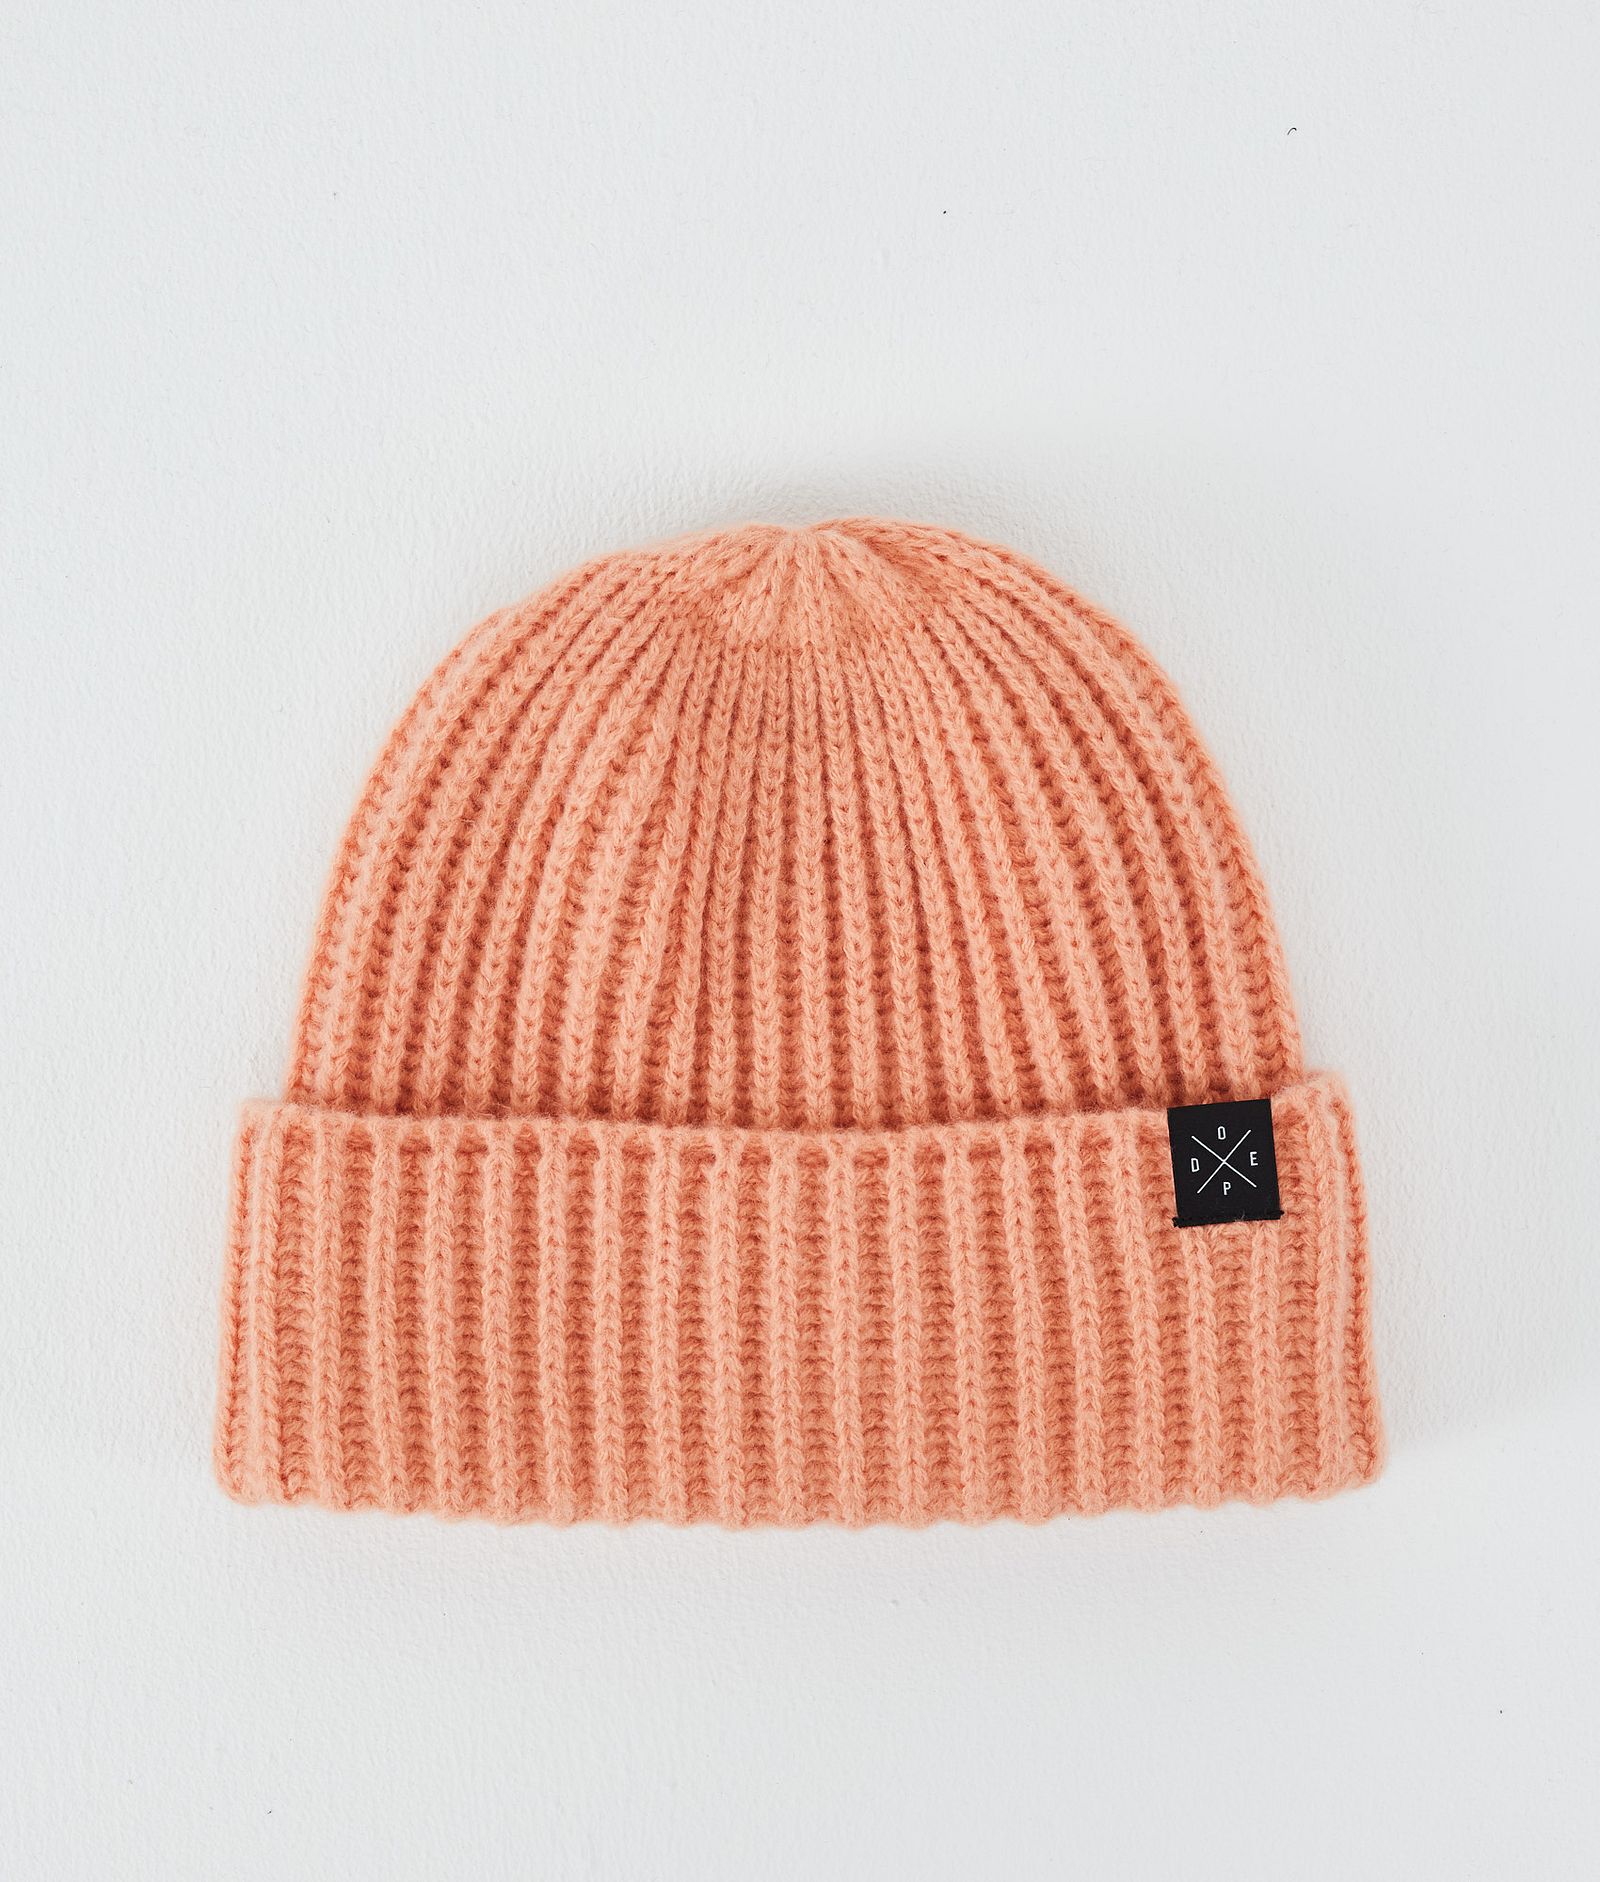 Dope Chunky Bonnet Faded Peach, Image 1 sur 3